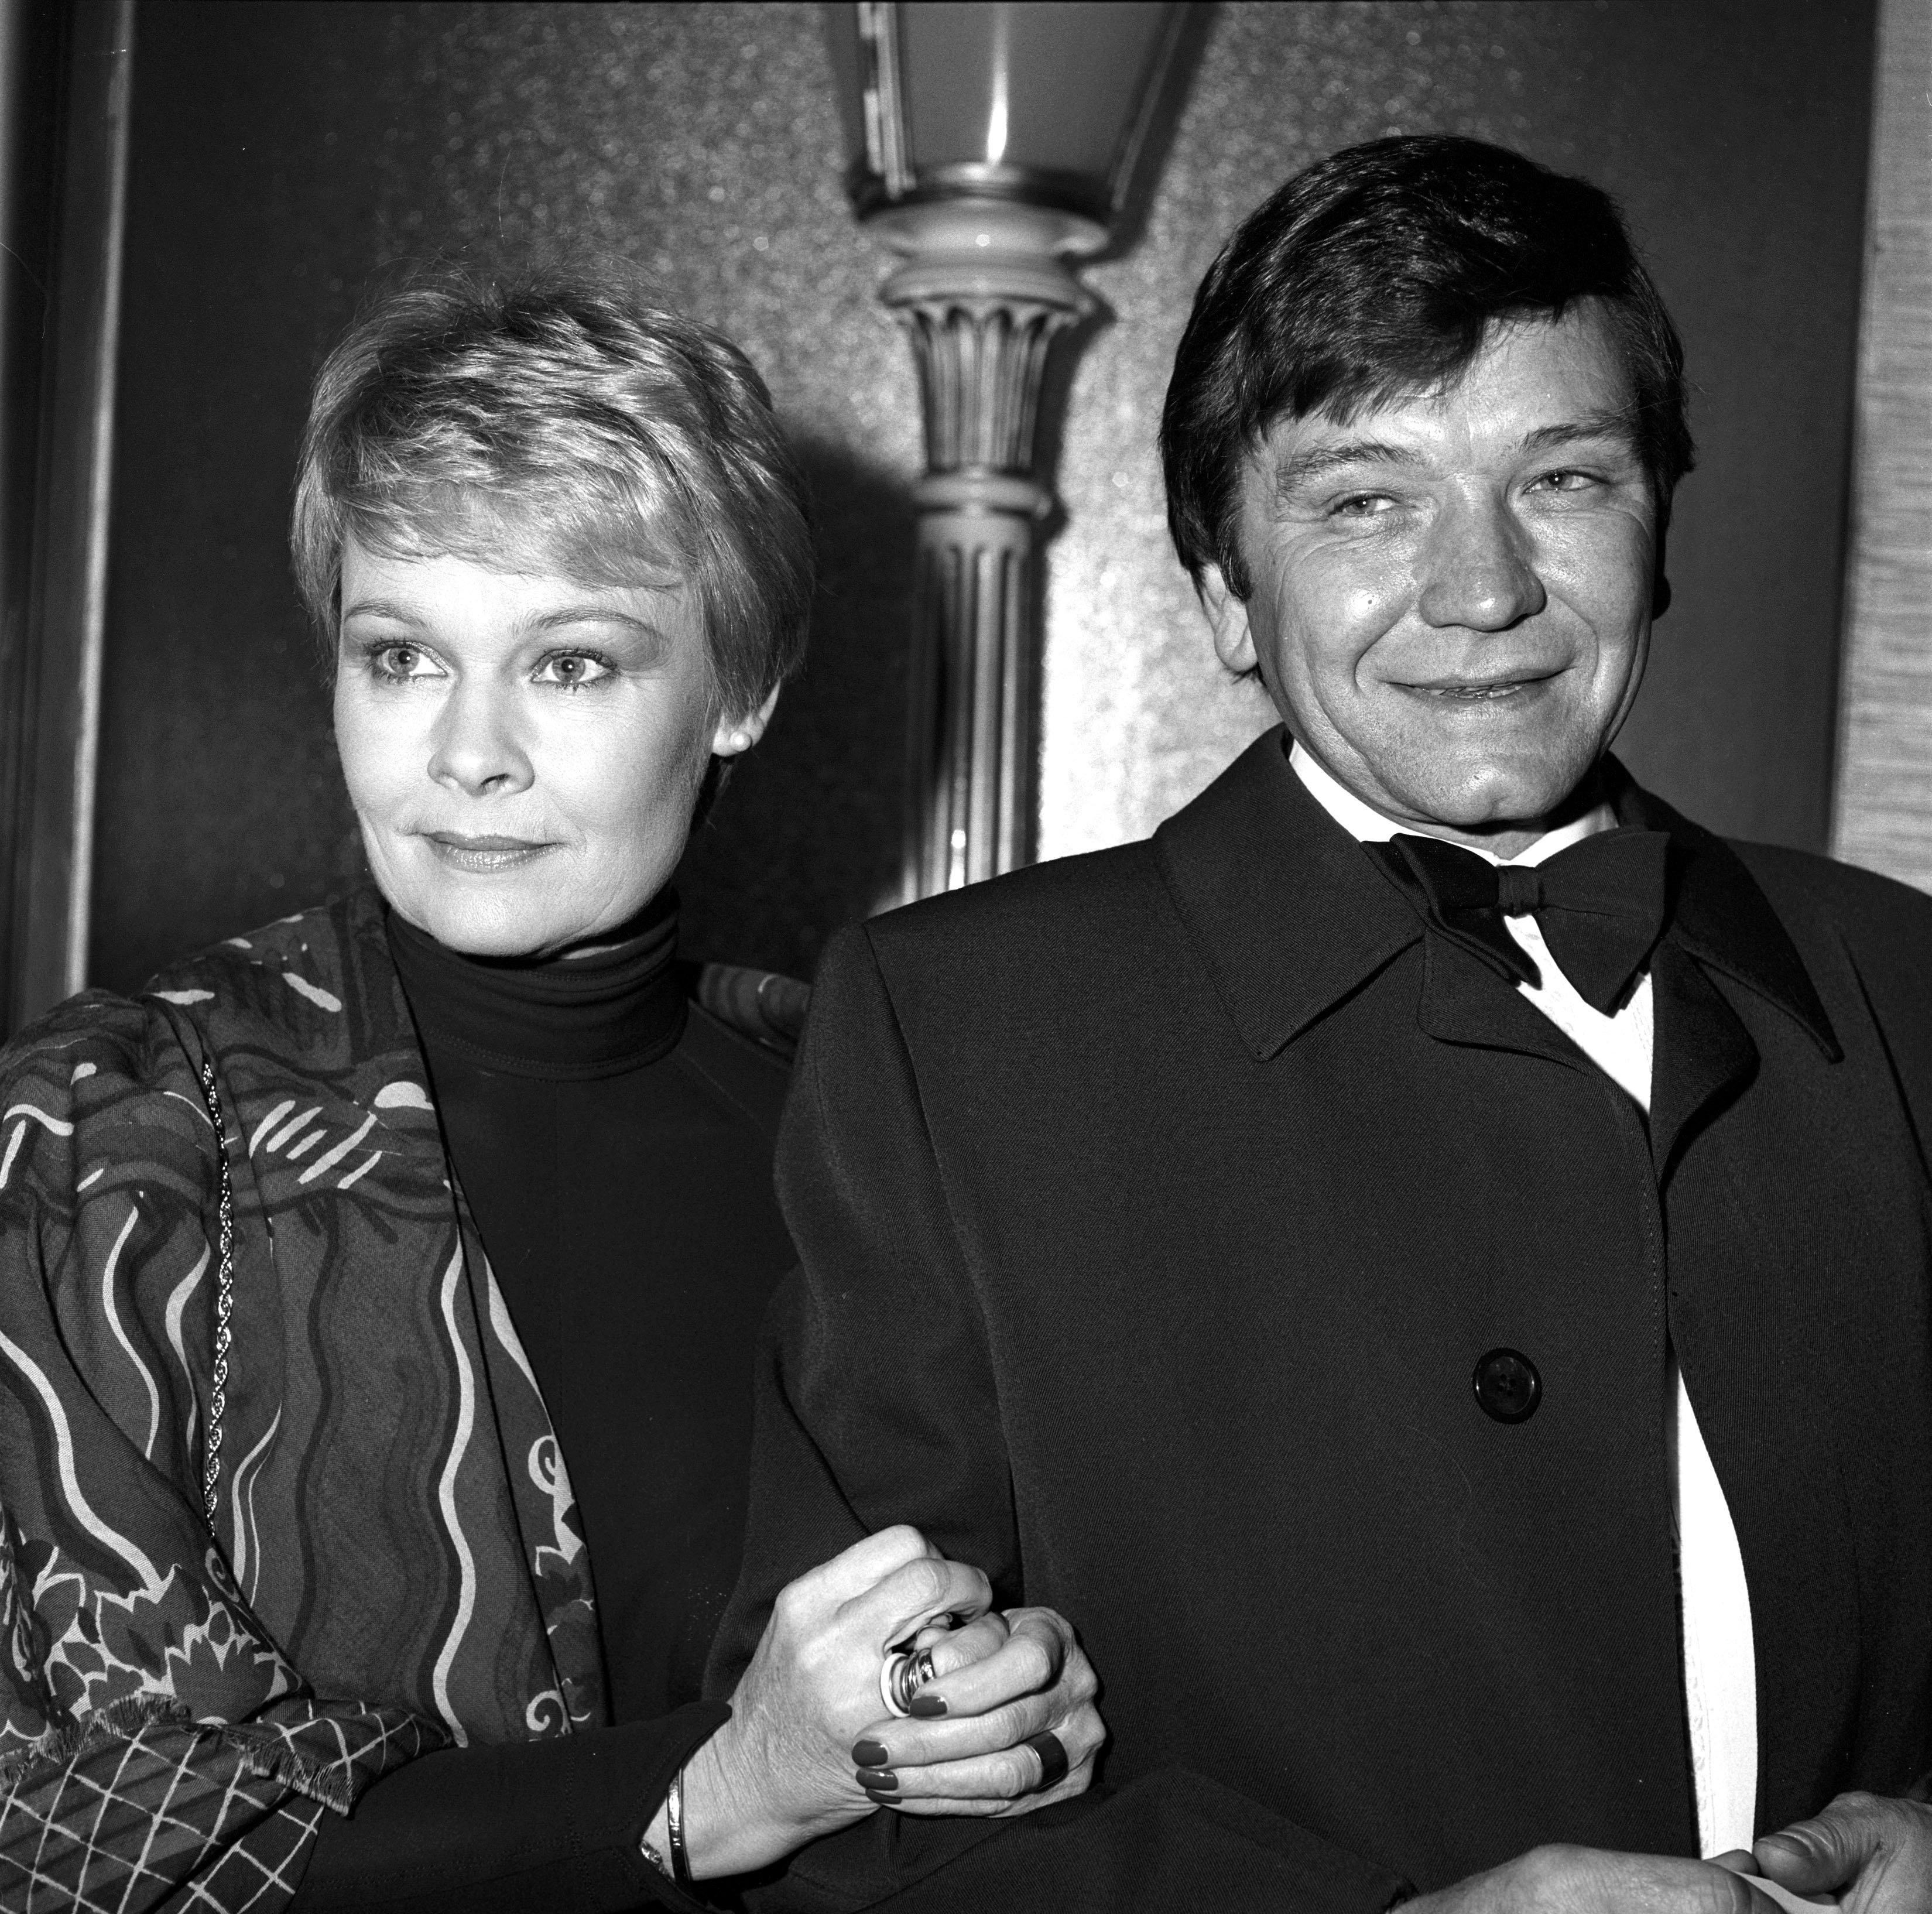 Judi Dench and Michael Williams at the BAFTA Awards in London in March 1982 | Source: Getty Images